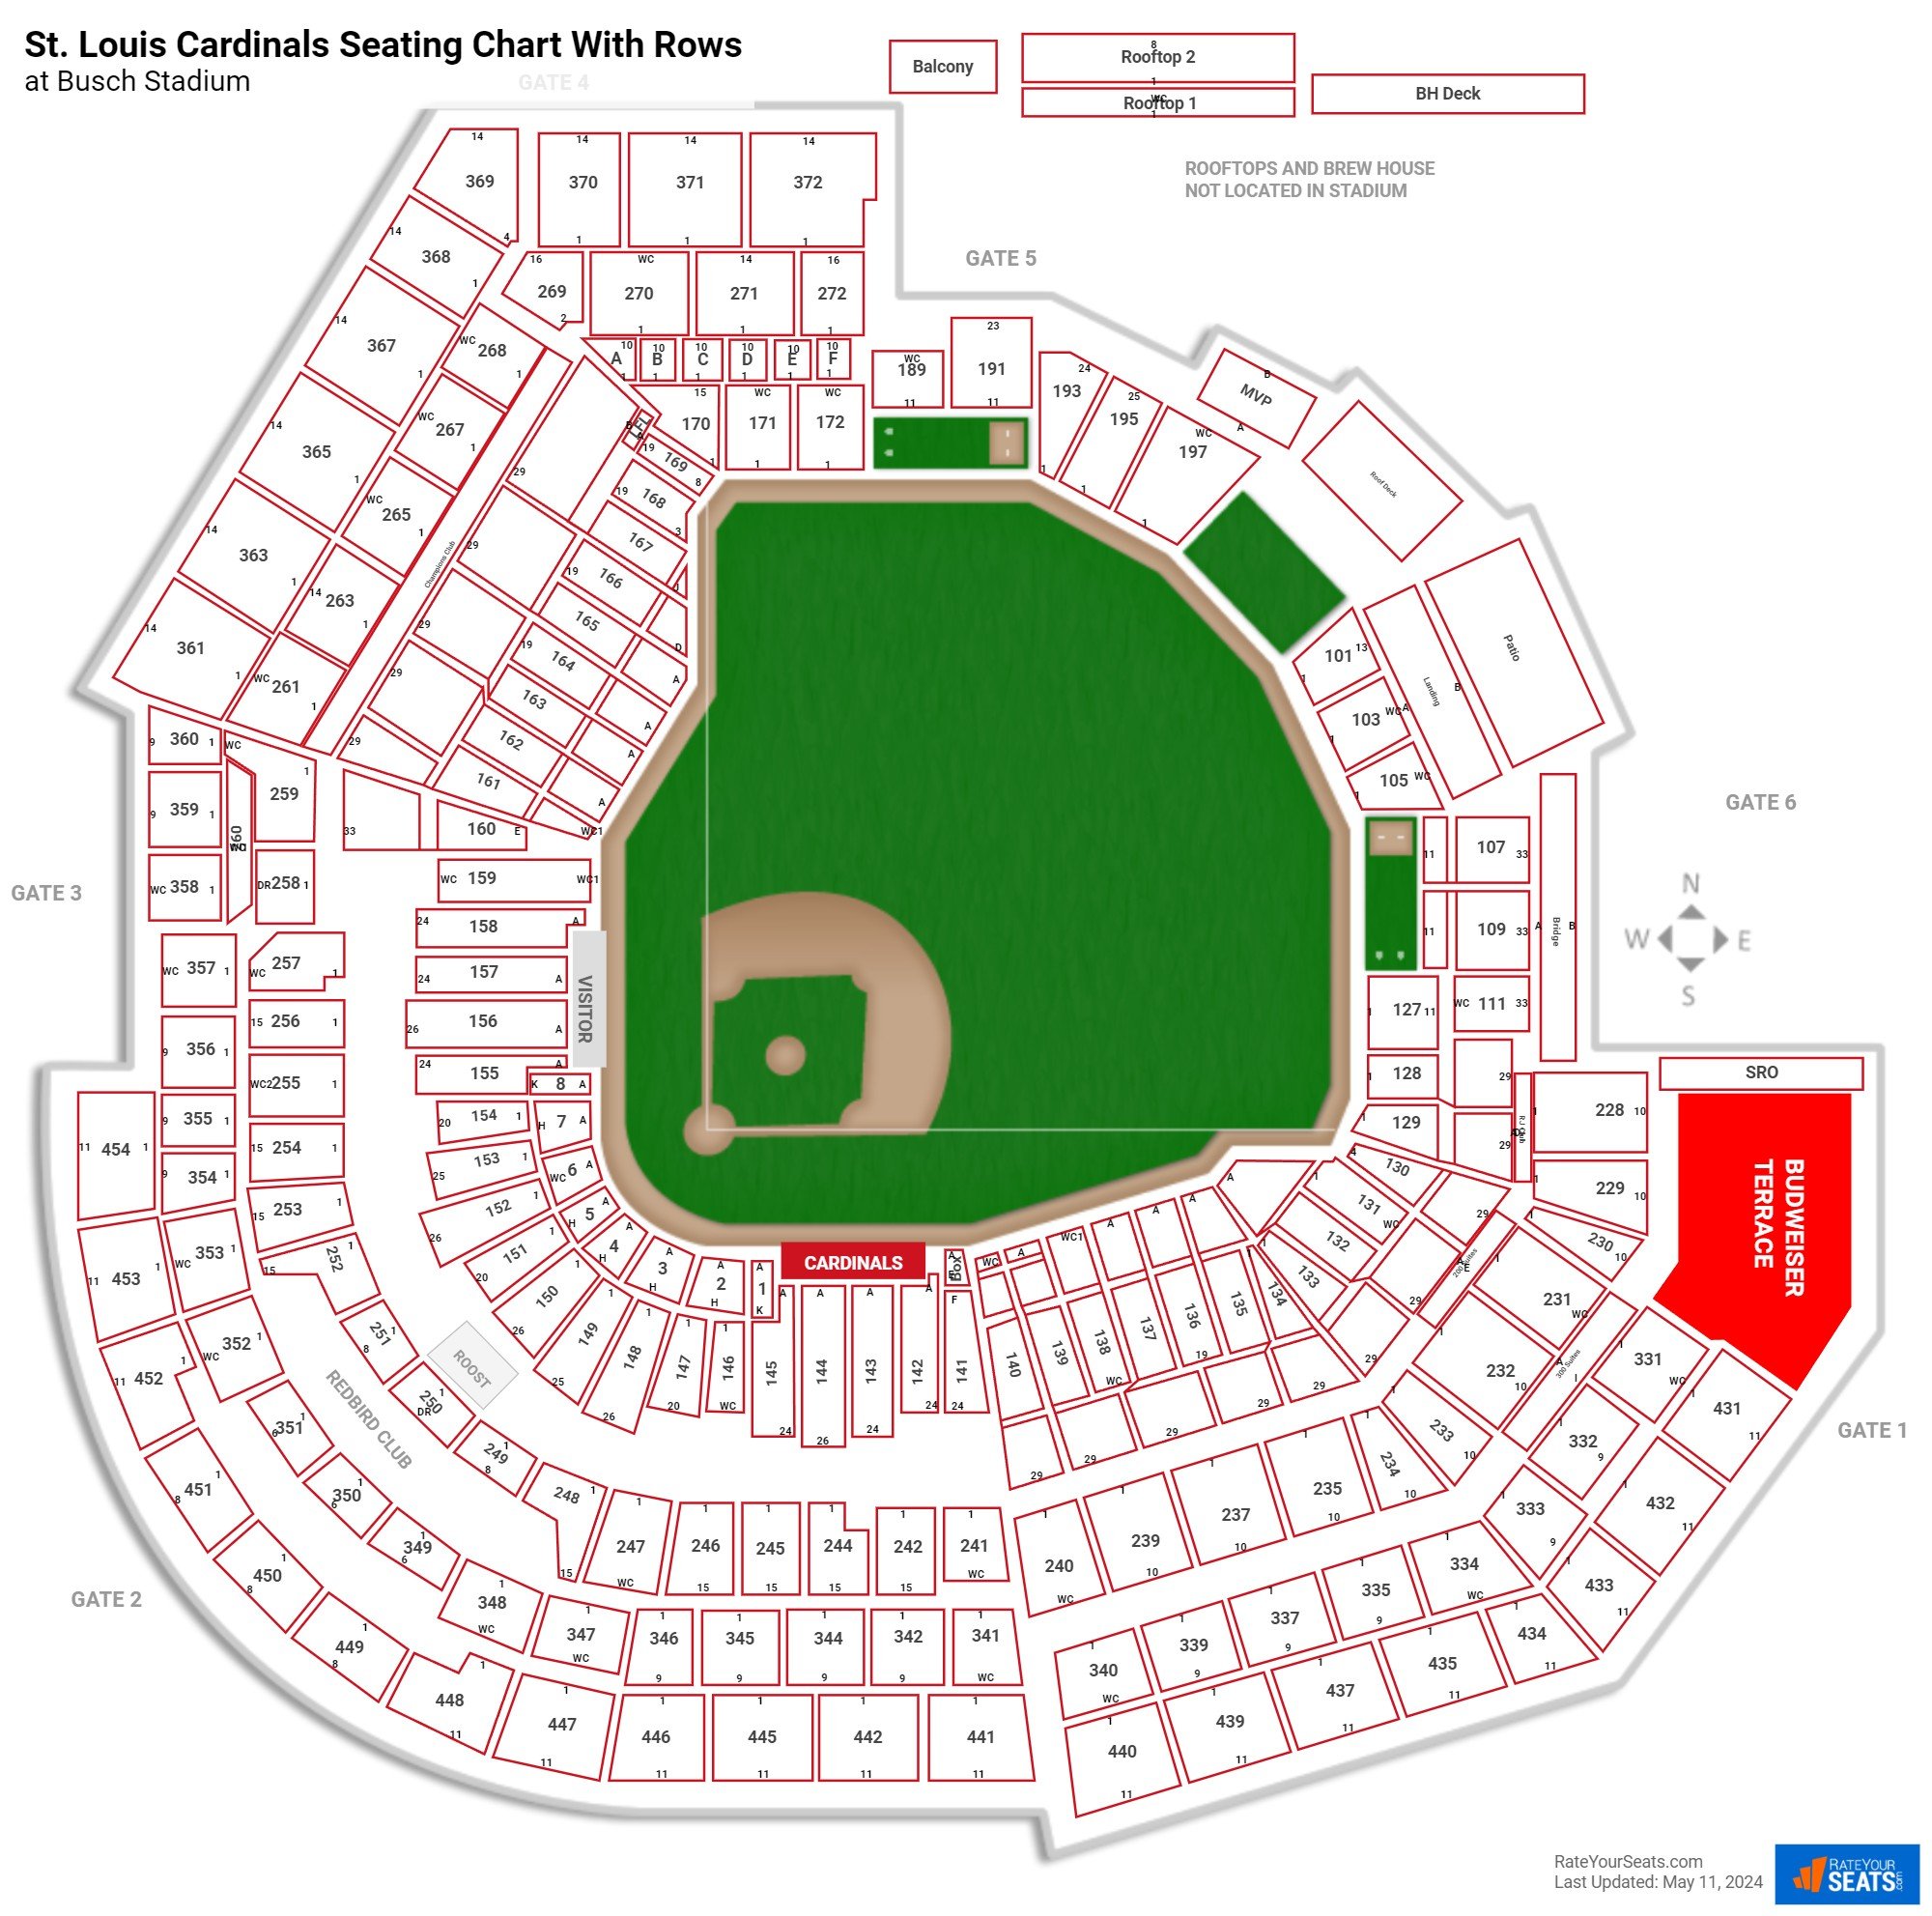 St. Louis Cardinals Seating Chart With Rows At Busch Stadium 